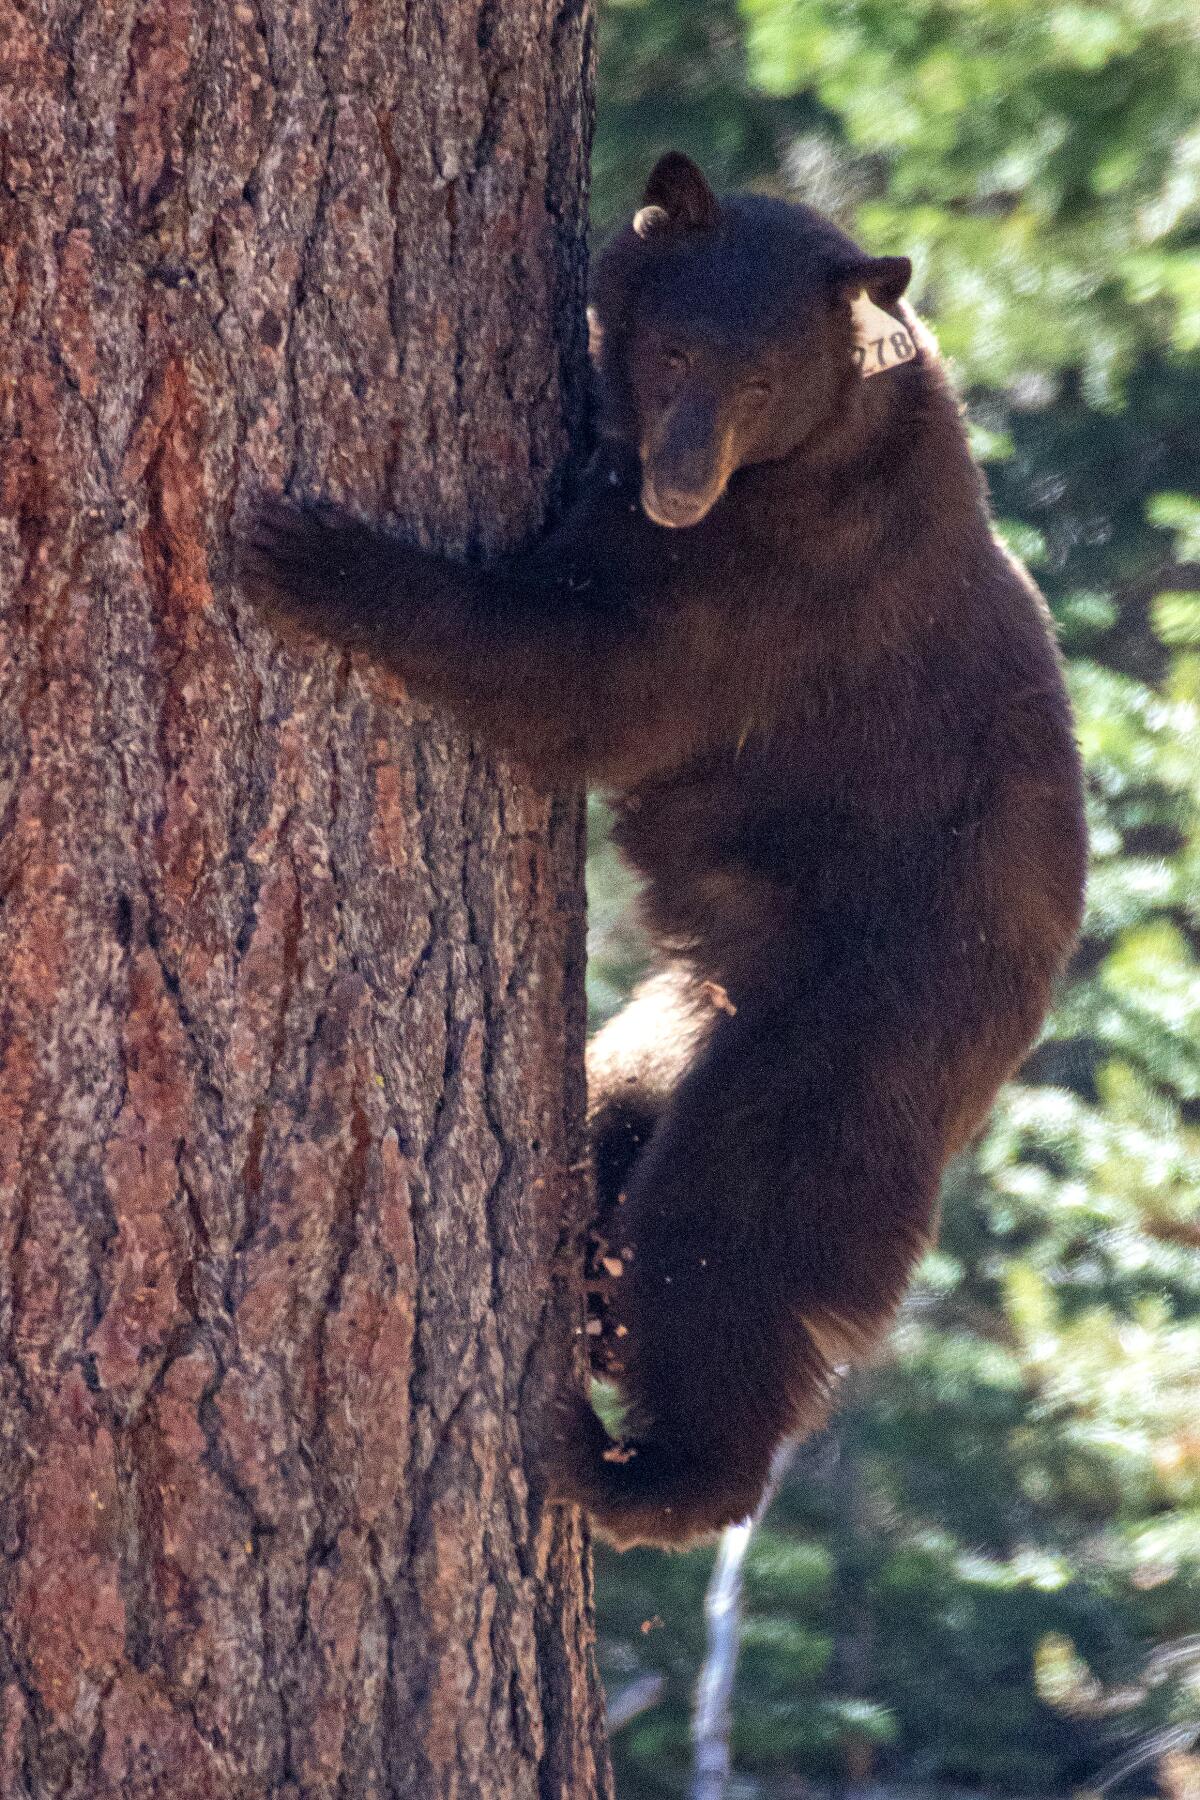 A bear clings to a tree trunk 